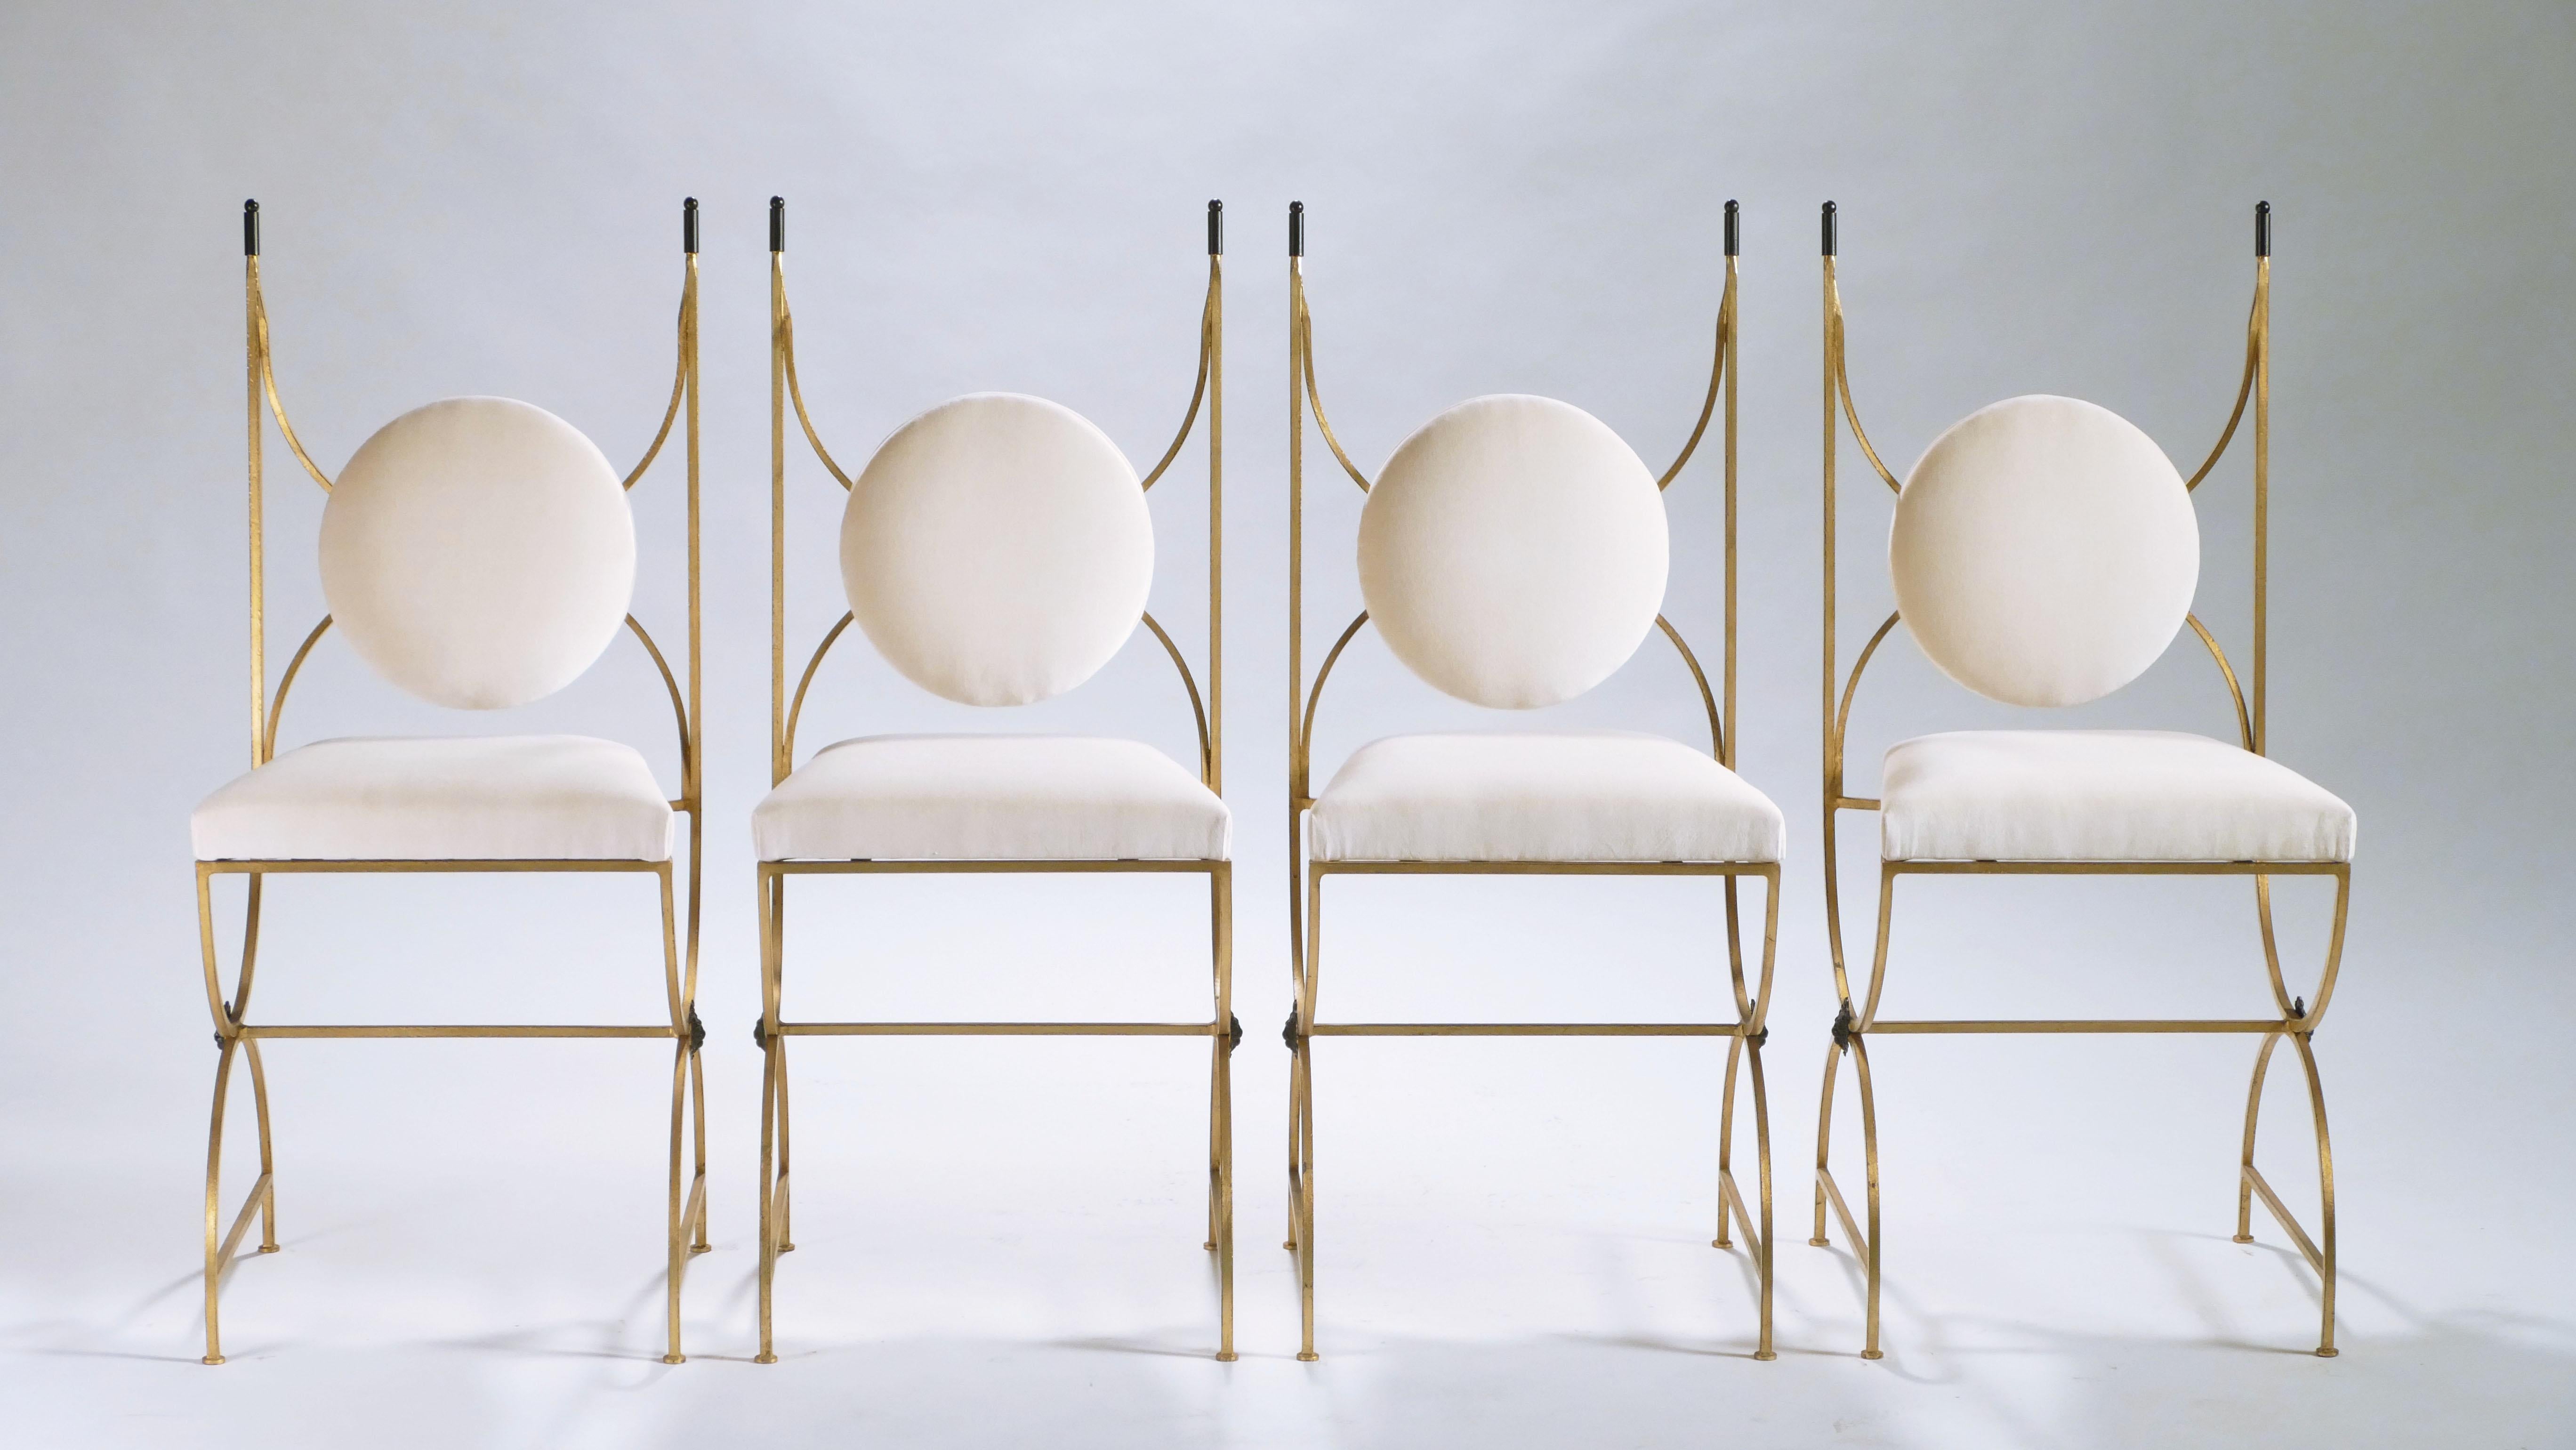 Grace your home with the true elegance of these four dining chairs. Wrought iron has been gilded with gold leaf for a gentle warm golden patina throughout the entire structure. These chairs are newly upholstered in a quality creme velvet that adds a